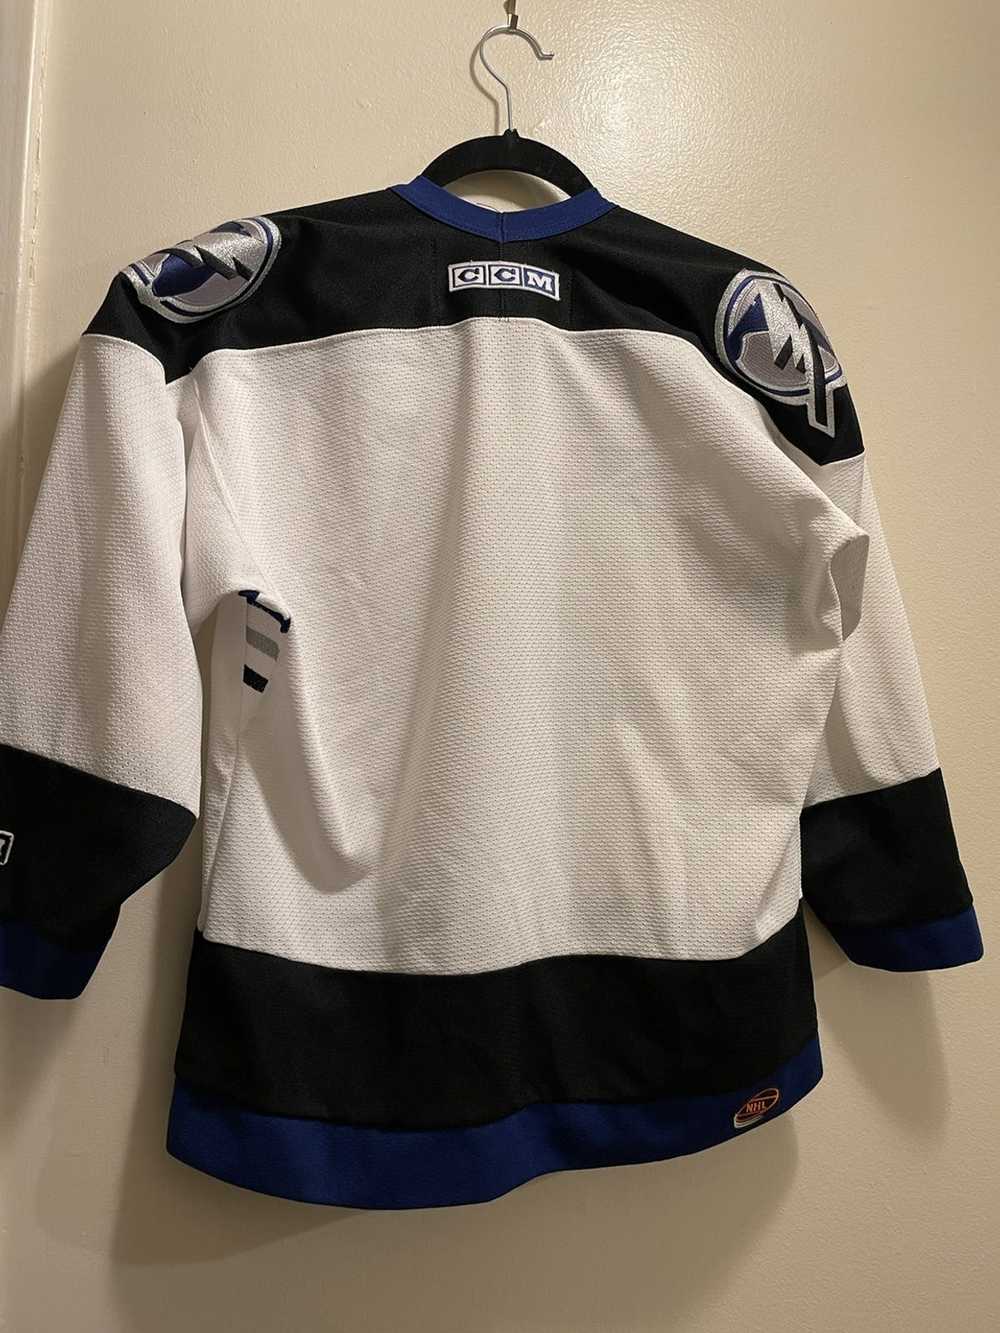 1999 Tampa Bay Lightning 3rd Alternate Storm Jersey - Vinny Lecavalier  rookie number 1999 ASG Patched - Customized by First Line Jerseys 🔥⚡ :  r/hockeyjerseys